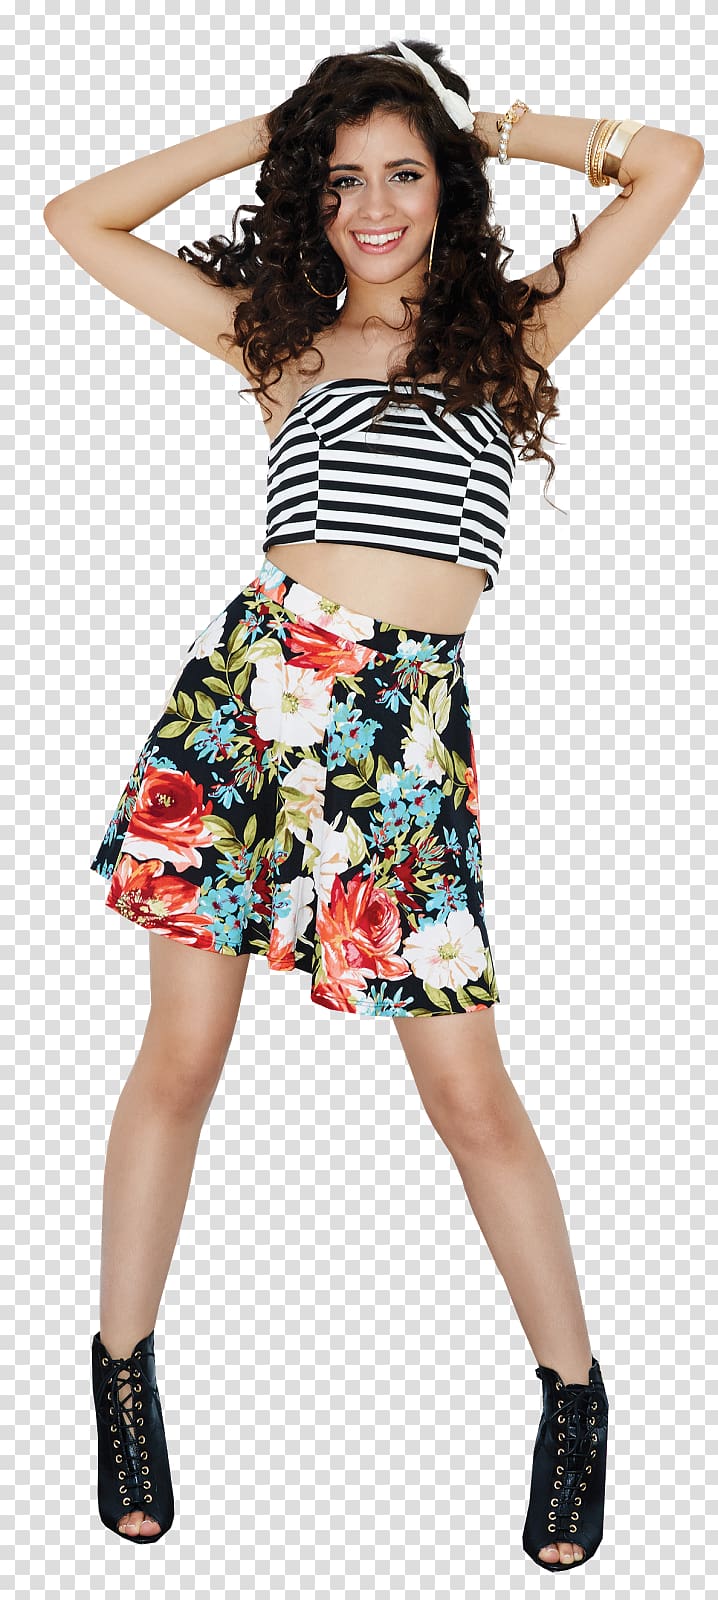 Camila Cabello Fifth Harmony Wet Seal Clothing, fifth harmony transparent background PNG clipart